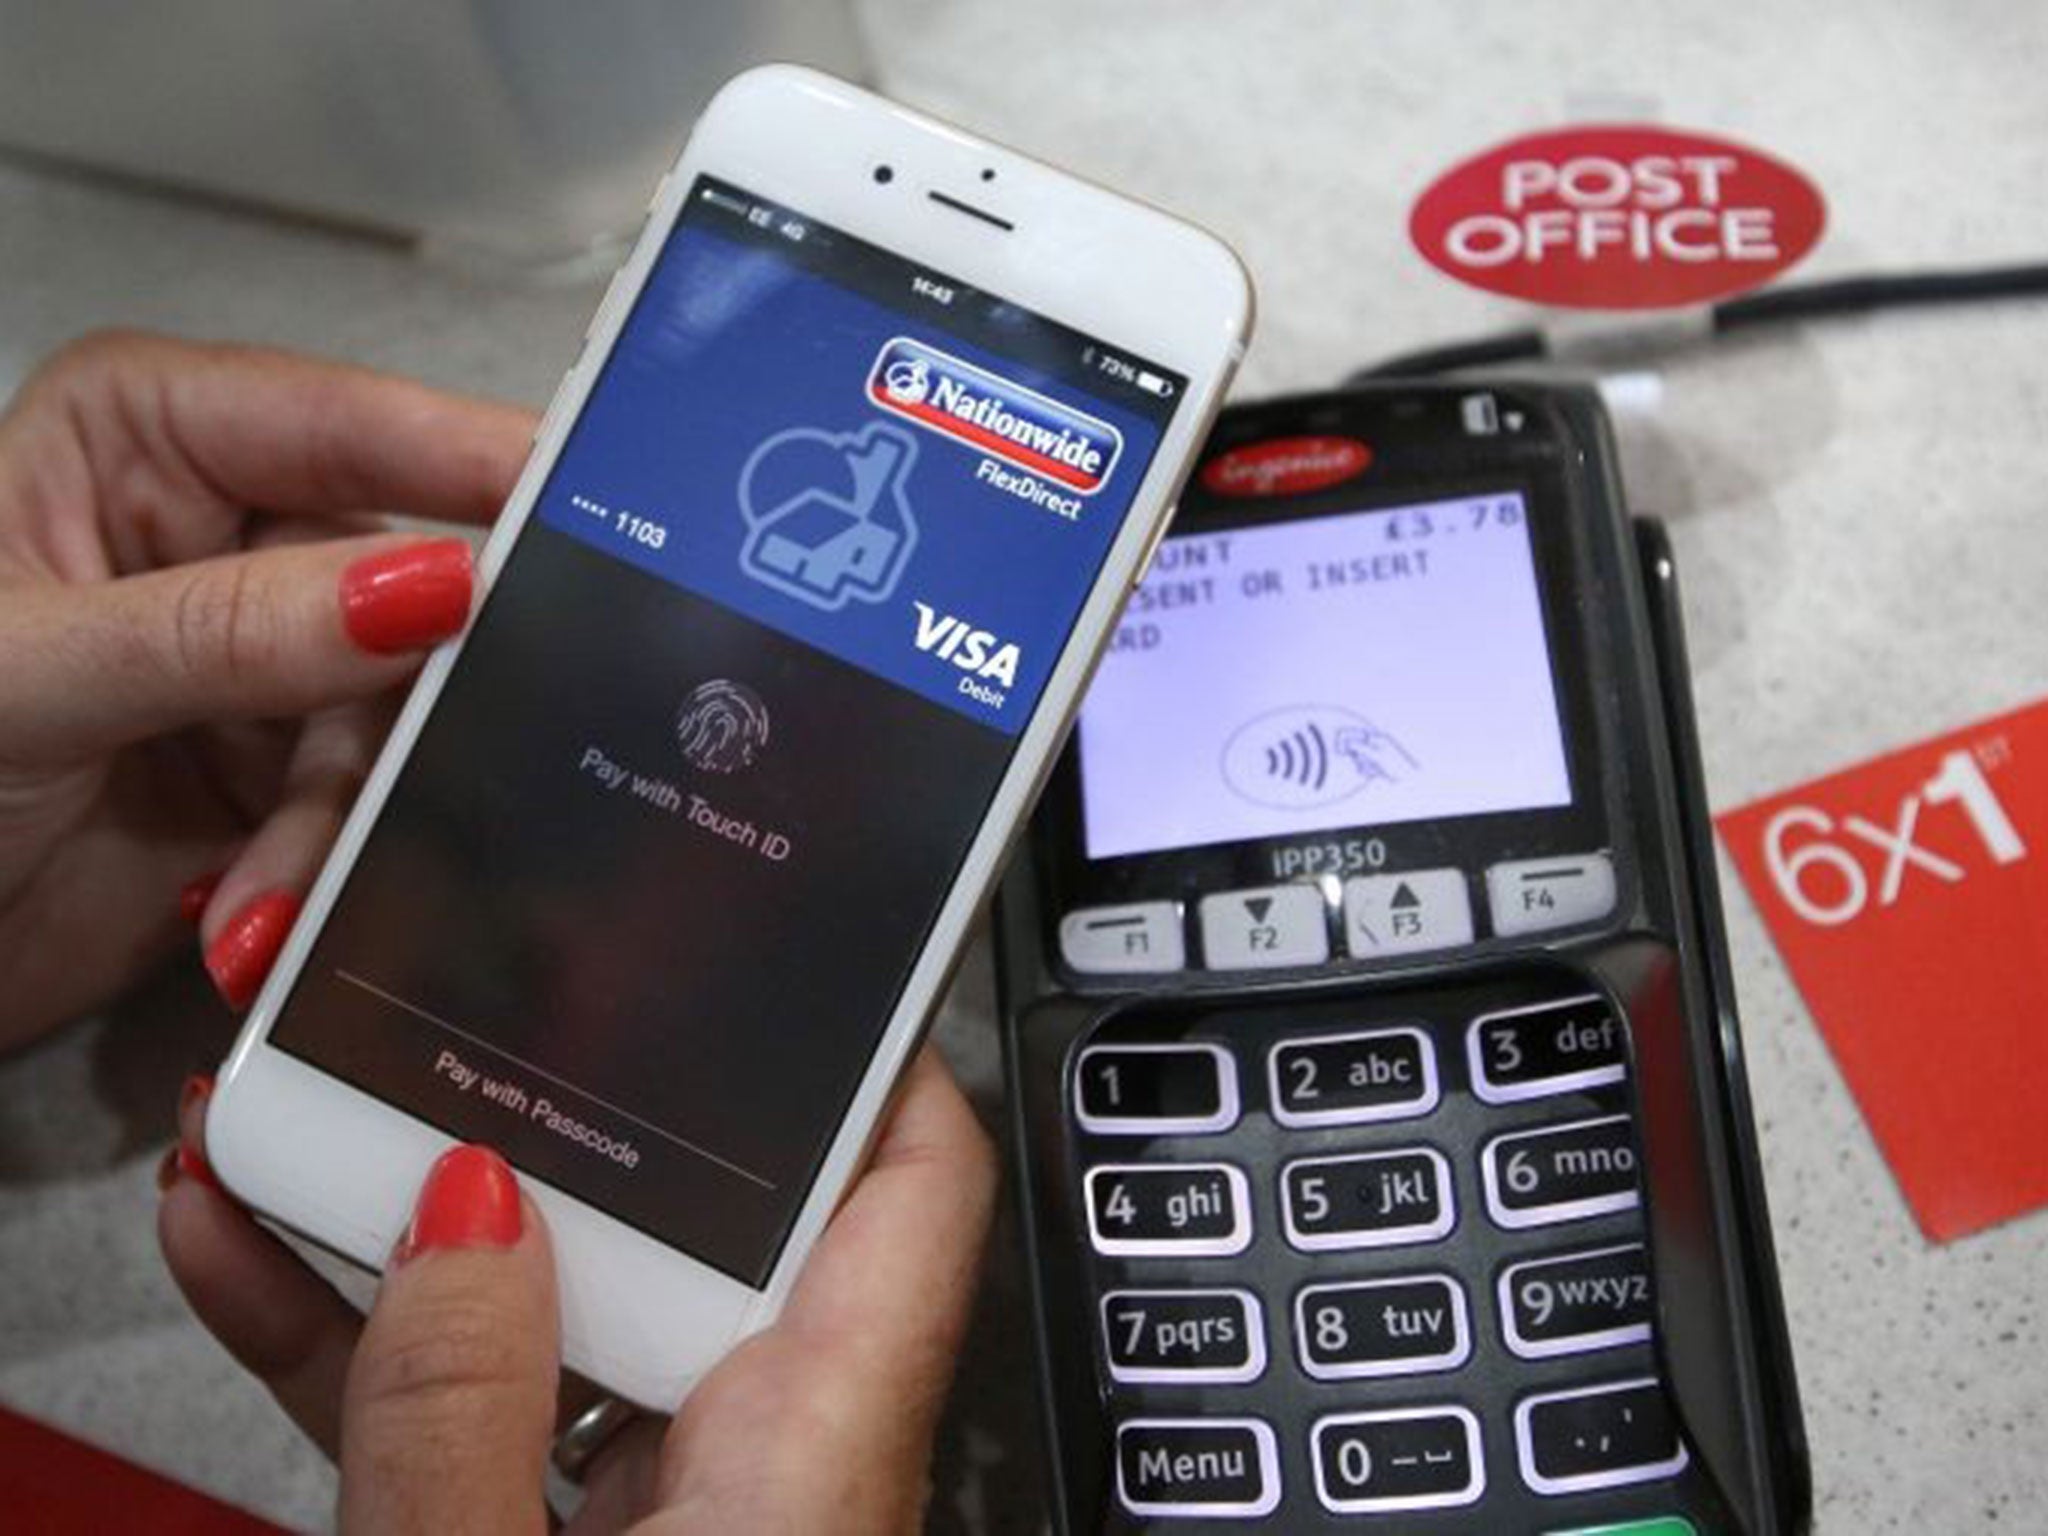 Spending money on tap: hi-tech innovations such as Apple Pay were beyond our imaginations 30 years ago